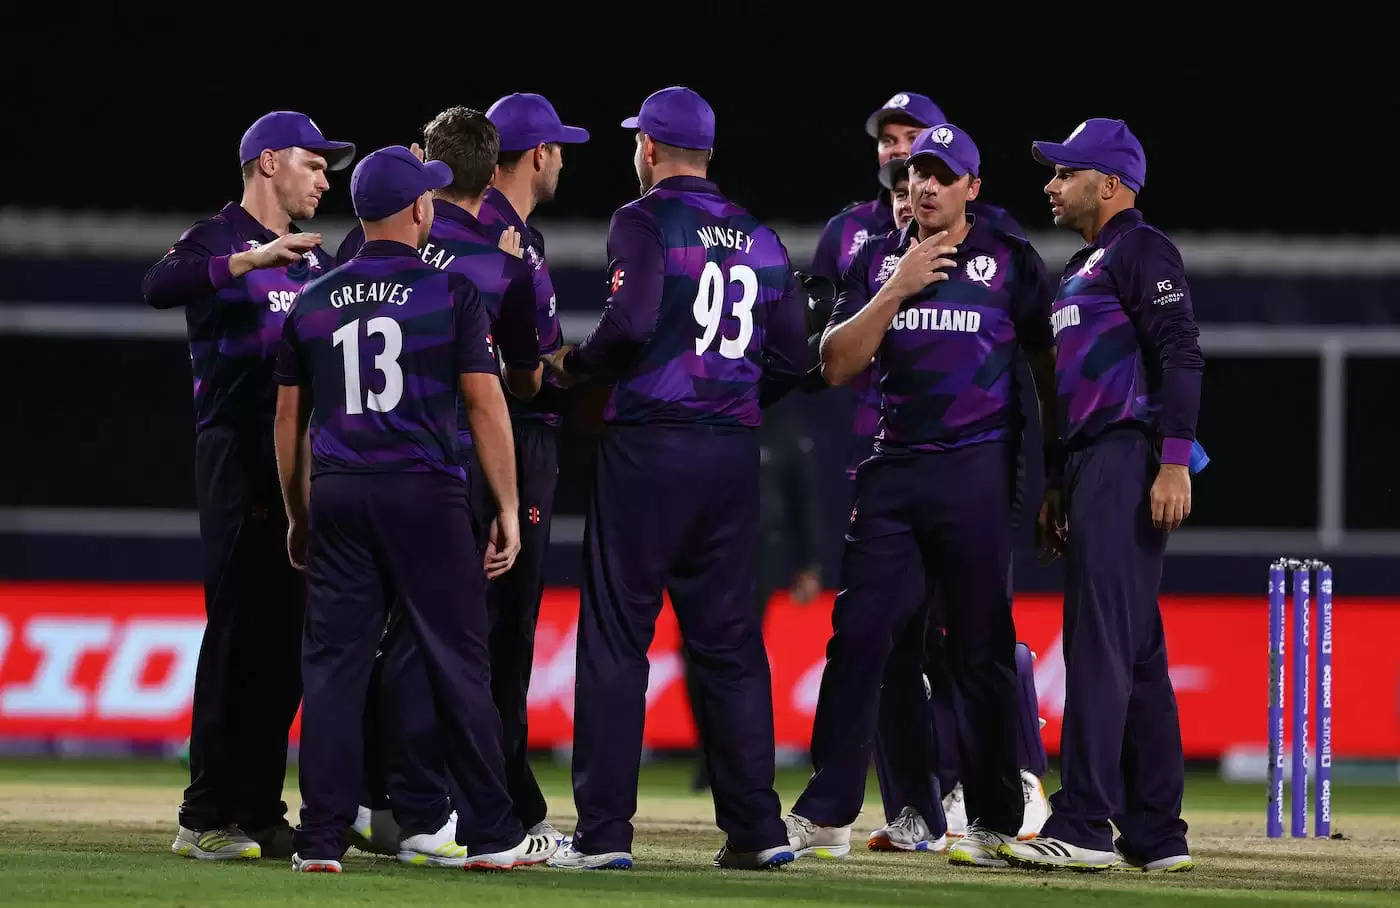 Scotland stun Bangladesh in the opening day of T20 World Cup 2021